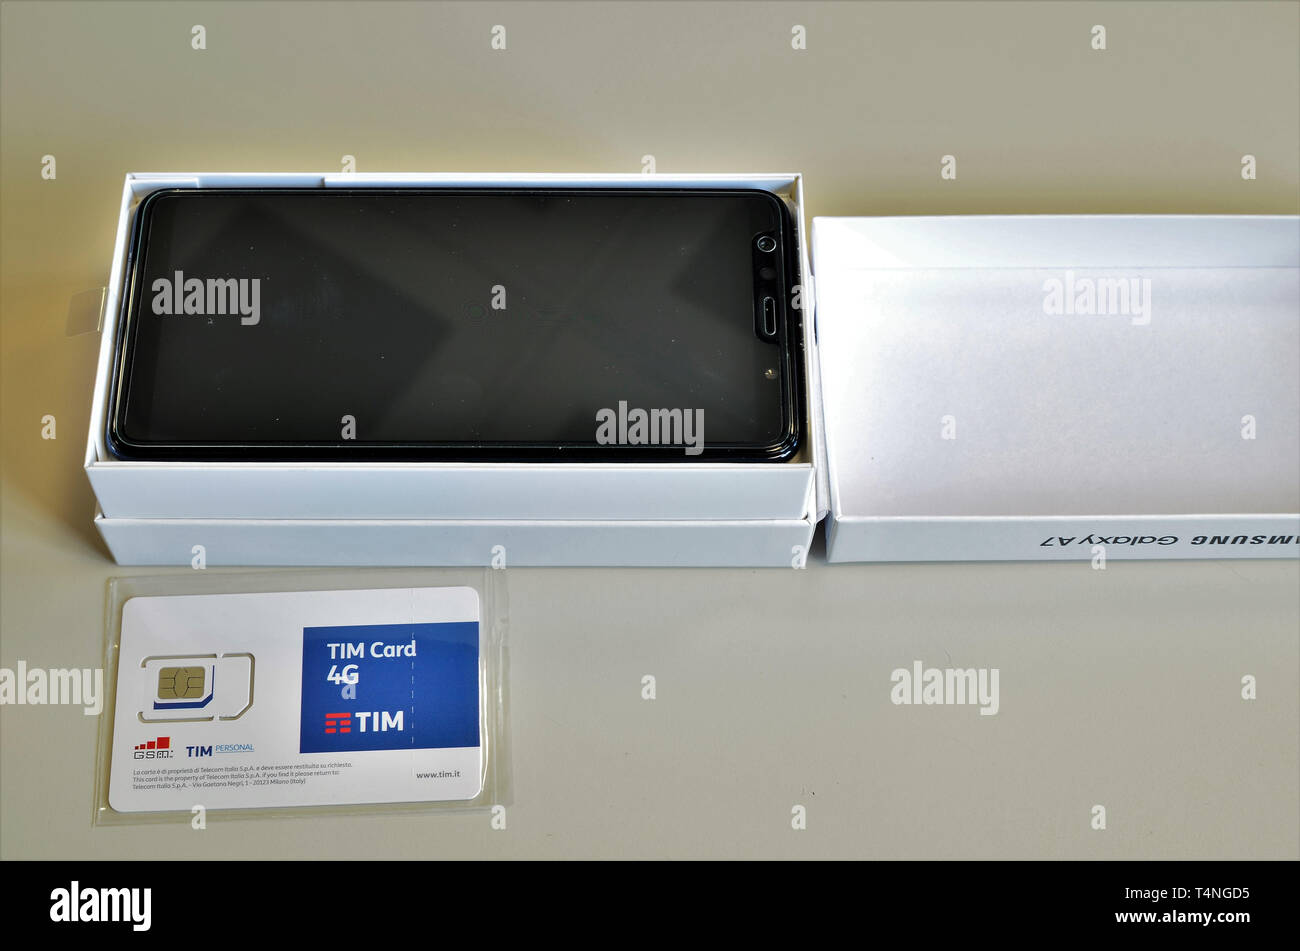 Turin, Piedmont, Italy. April 2019. The package of a Samsung Galaxy A7 has been opened, it recognizes the SIM of the telephone operator and the smartp Stock Photo